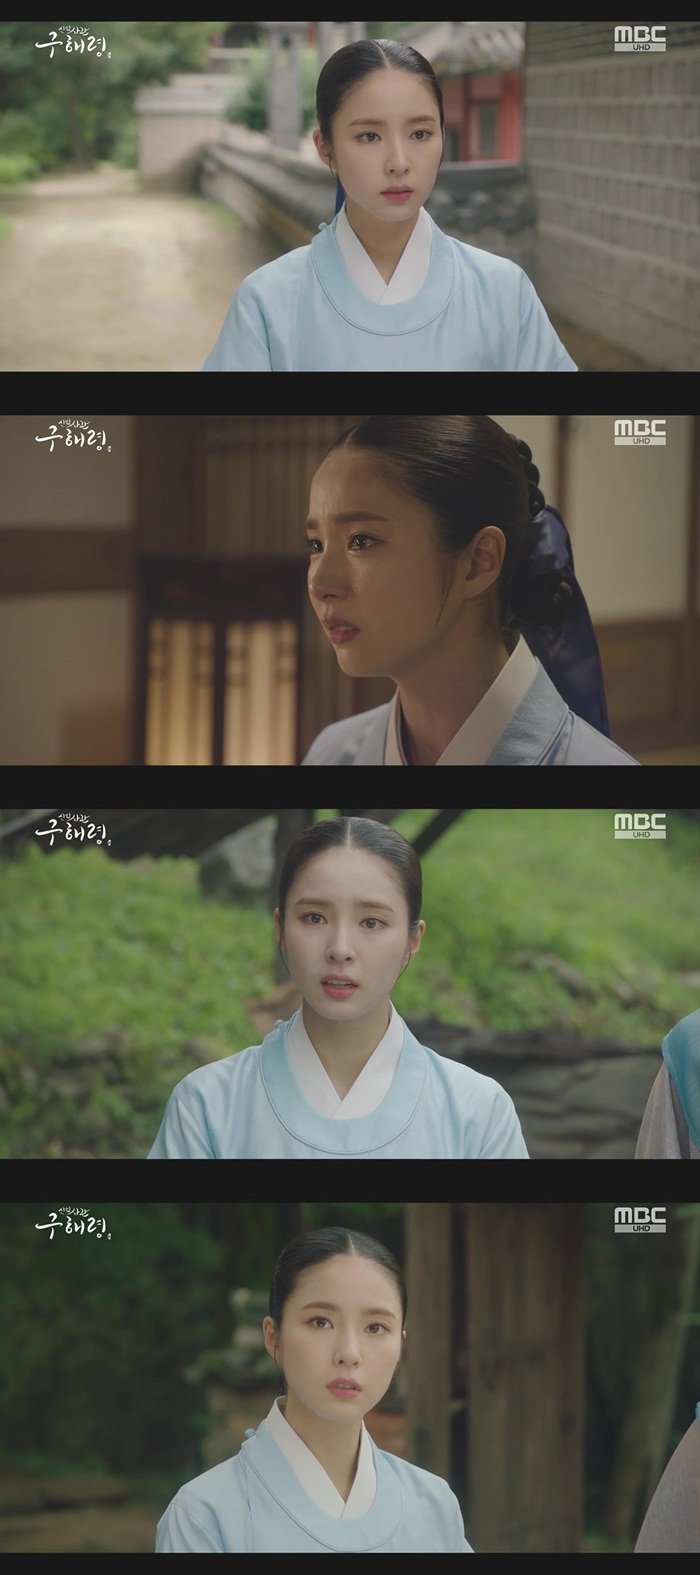 On the 19th MBC drama Na Hae-ryung, Shin Se-kyung (formerly Na Hae-ryung) and Cha Eun-woo (Lee Rim) were shown struggling to figure out the secrets of their fathers.Shin Se-kyung died 20 years ago of a reverse crime by the father of the father, and was able to live in the Qing Dynasty with the disciple of Father, Gonghwan (Koo Jae-kyung).He had pretended to know nothing, and now he didnt want to live like that. Tracking began about the reason Father was involved in the crime of reverse, the reason why Hotham became a junkie.Cha Eun-woo confirmed the day of his death and the day of his birth, but there was no mention of himself anywhere.I visited Kim Min-sang, the current king, and confirmed, Have I ever been a son for a moment? Did I ever want to see him?There was a person who shared the pain with Cha Eun-woo by his side, and it was Shin Se-kyung. Cha Eun-woo was crying together with his arms.Shin Se-kyung received a message that Kim Il-mok was tortured because he did not give a past article through the documents hidden by the fair.Since then, the Jinseo Hodam teacher has spread in the palace, and Shin Se-kyung, who encountered it, looked more closely than anyone else.In it, Hodam and Youngan made Seoraewon to open a new world, where they learned Western language and medicine, and were misunderstood and killed.Shin Se-kyung, who had read the gold with his trembling hands, wept. I felt so sorry for my fathers death when I faced the truth.I thought I should find the Sacho and correct the distorted history. Shin Se-kyung found an acquaintance of Kim Il-mok with Cha Eun-woo.I have a paper on a blue forested island, he recalled, but I thought there was a sandal there, but I did not know where it was.At that moment Cha Eun-woo headed for the Green West Party, which meant a blue forested island; finding the Sacho emerged as their last task.On this day, Shin Se-kyung was more sick than anyone when he learned the truth about his fathers death.As a self-initiated female, Na Hae-ryung, she has been a strong and leading figure, and she has endured the weight of the title roll without losing this figure until the end.